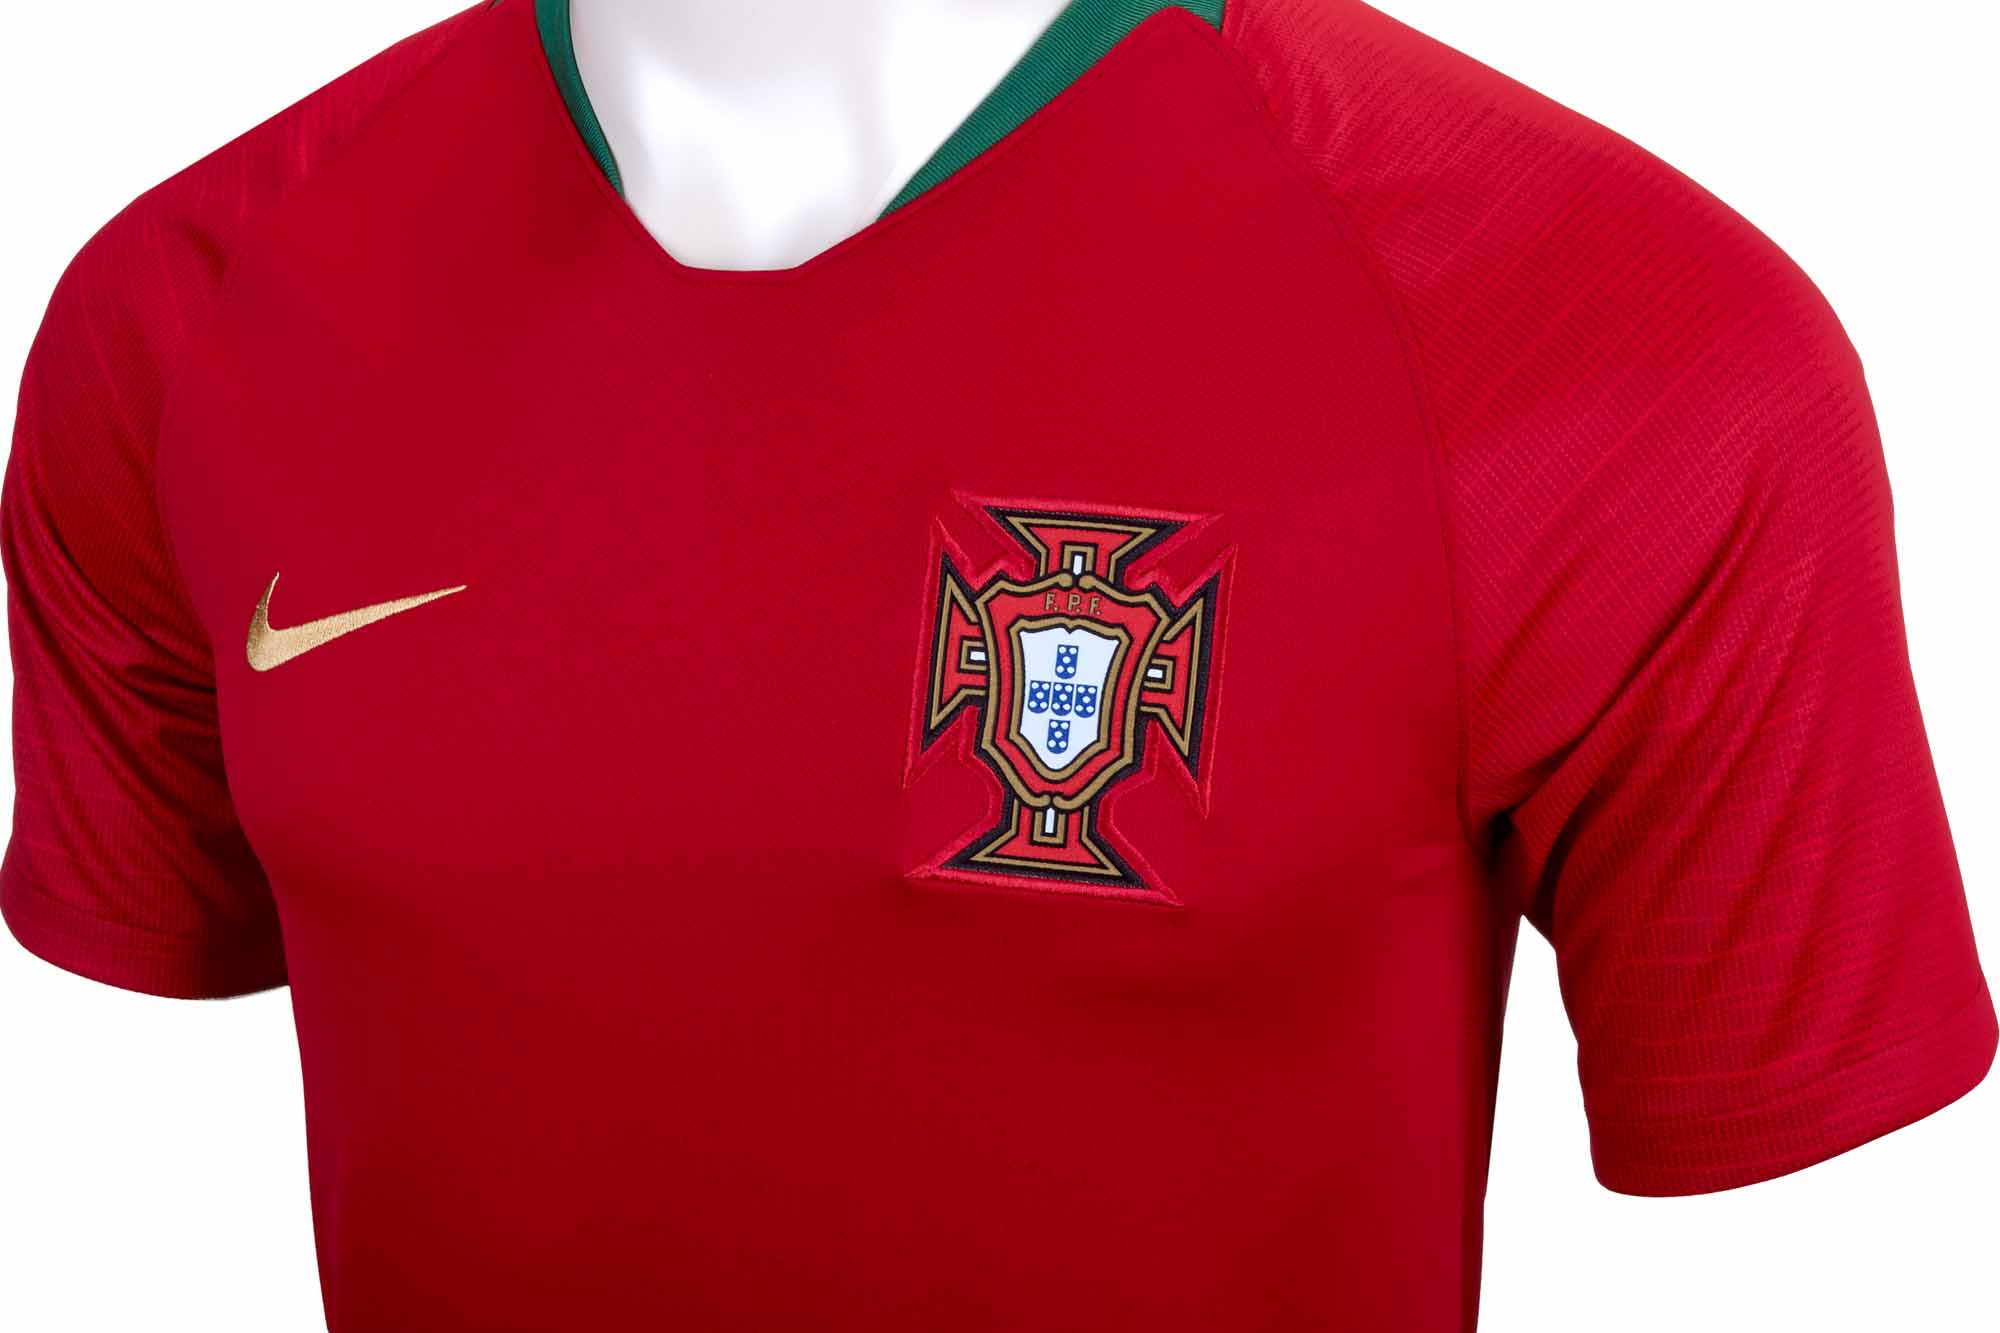 portugal jersey